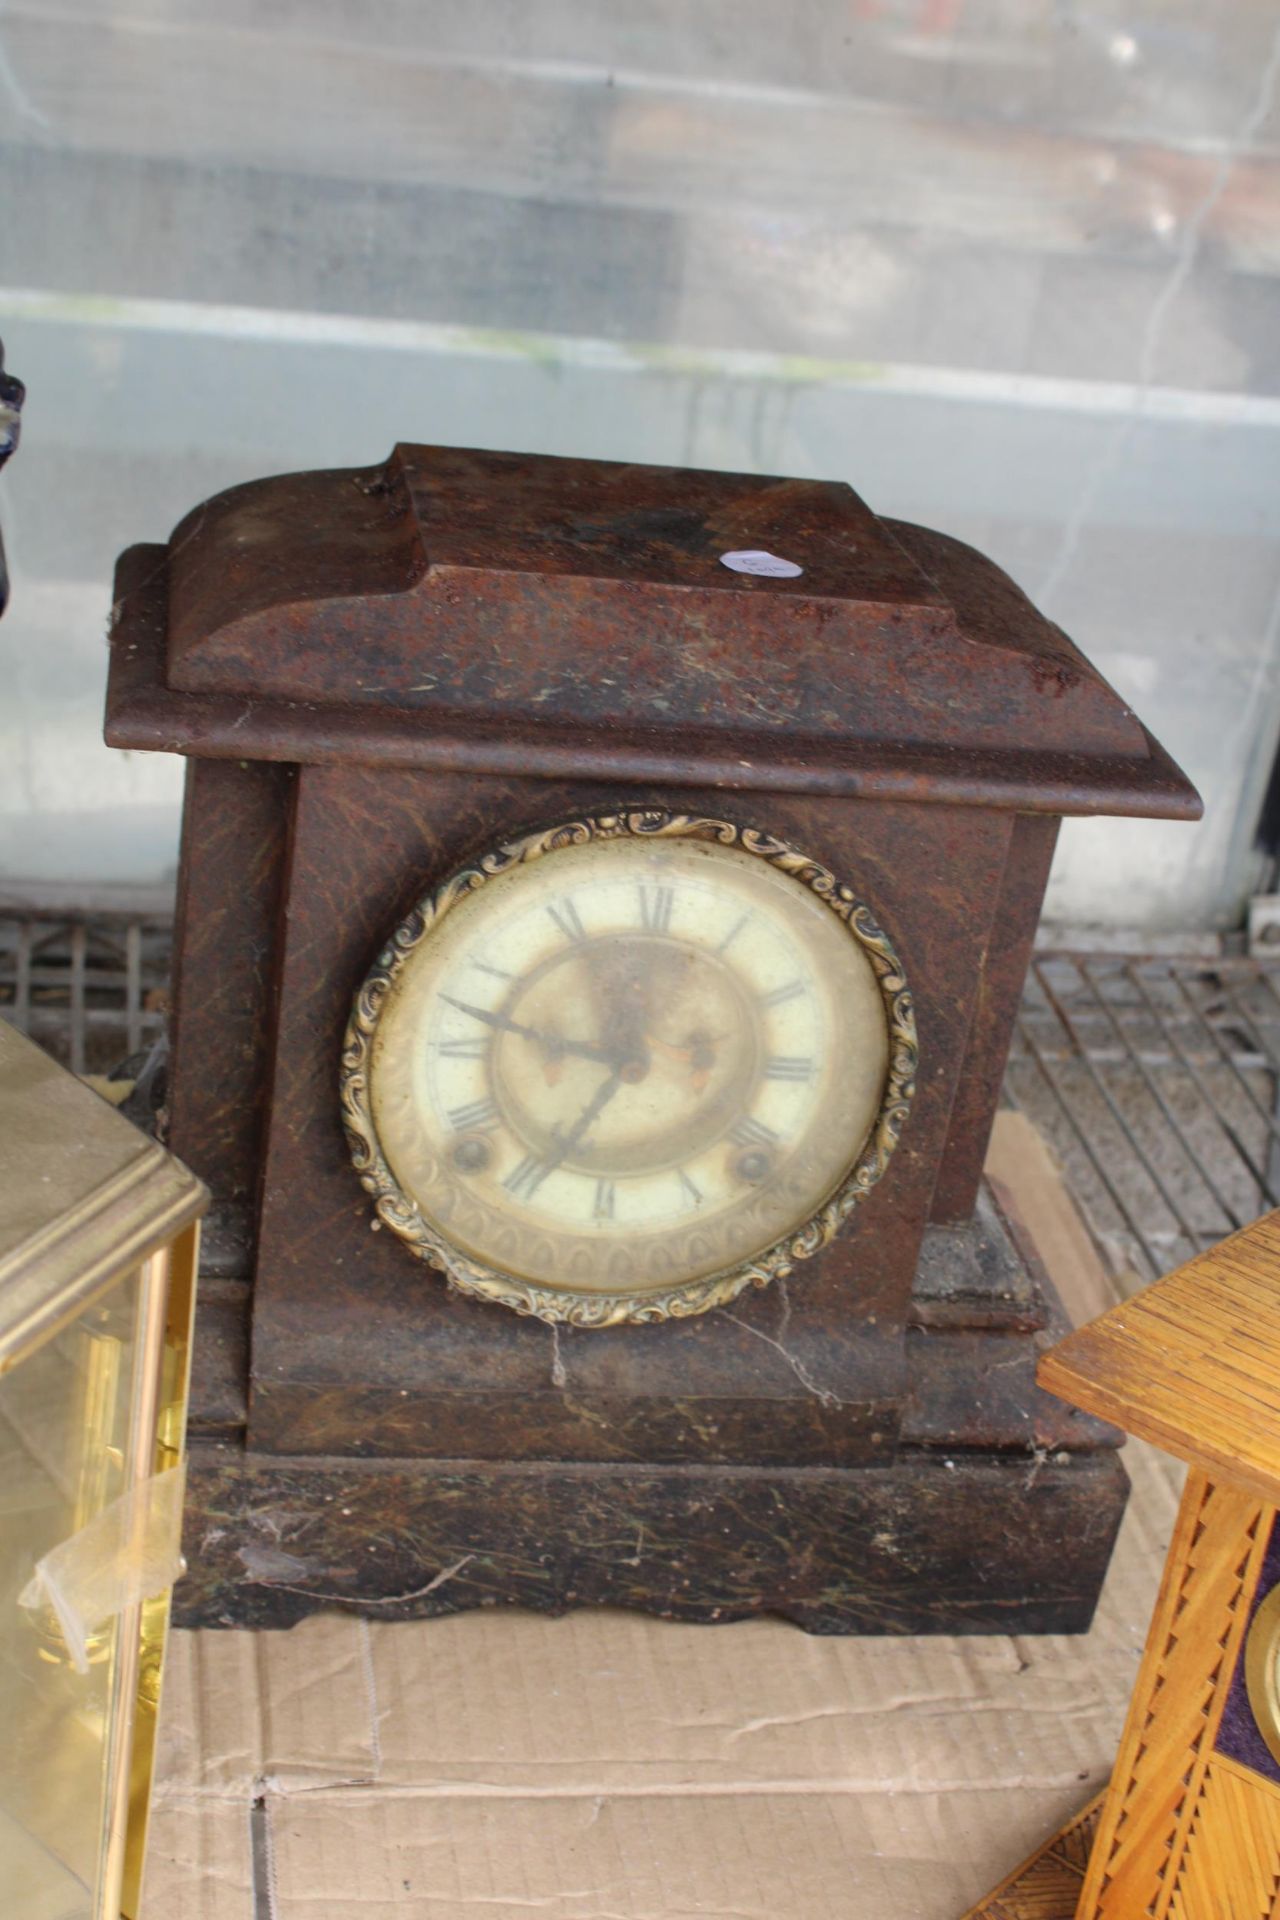 AN ASSORTMENT OF VINTAGE CLOCKS TO INCLUDE A CERAMIC MANTLE CLOCK, AN ANIVERSARY CLOCK AND A - Image 6 of 6